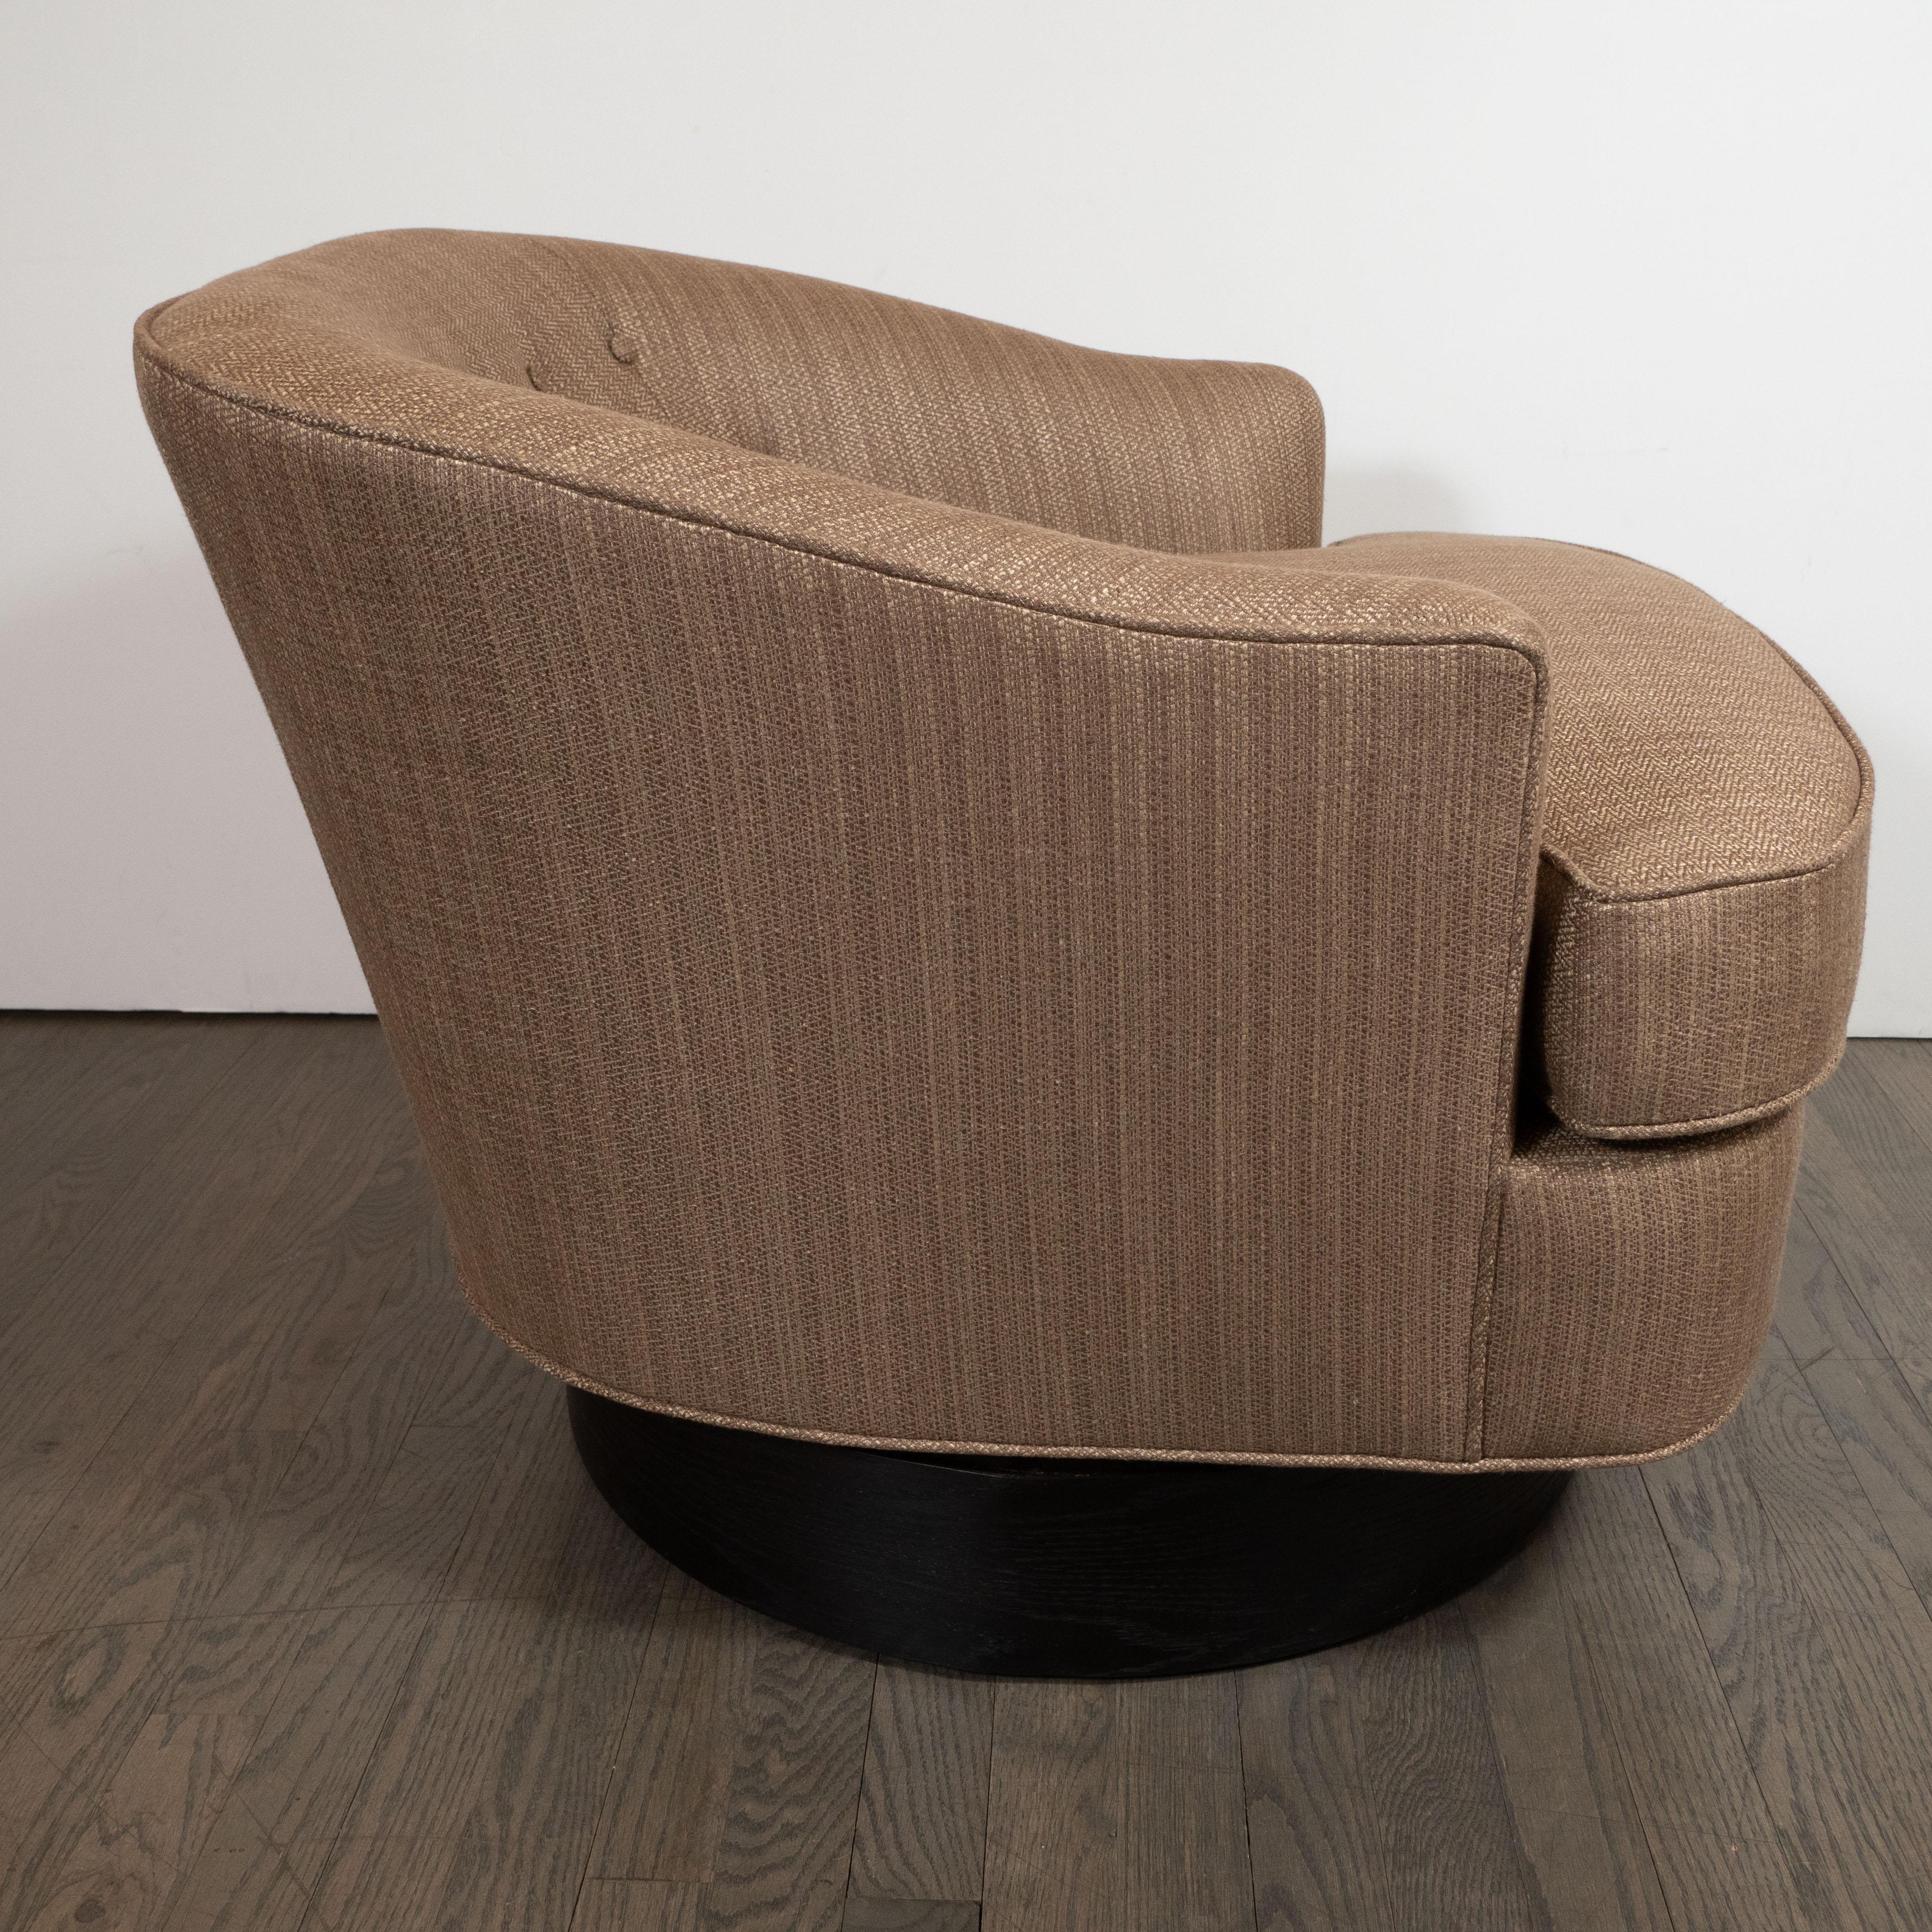 Ebonized Mid-Century Modern Button Back Swivel Chair in Holly Hunt Umber Fabric For Sale